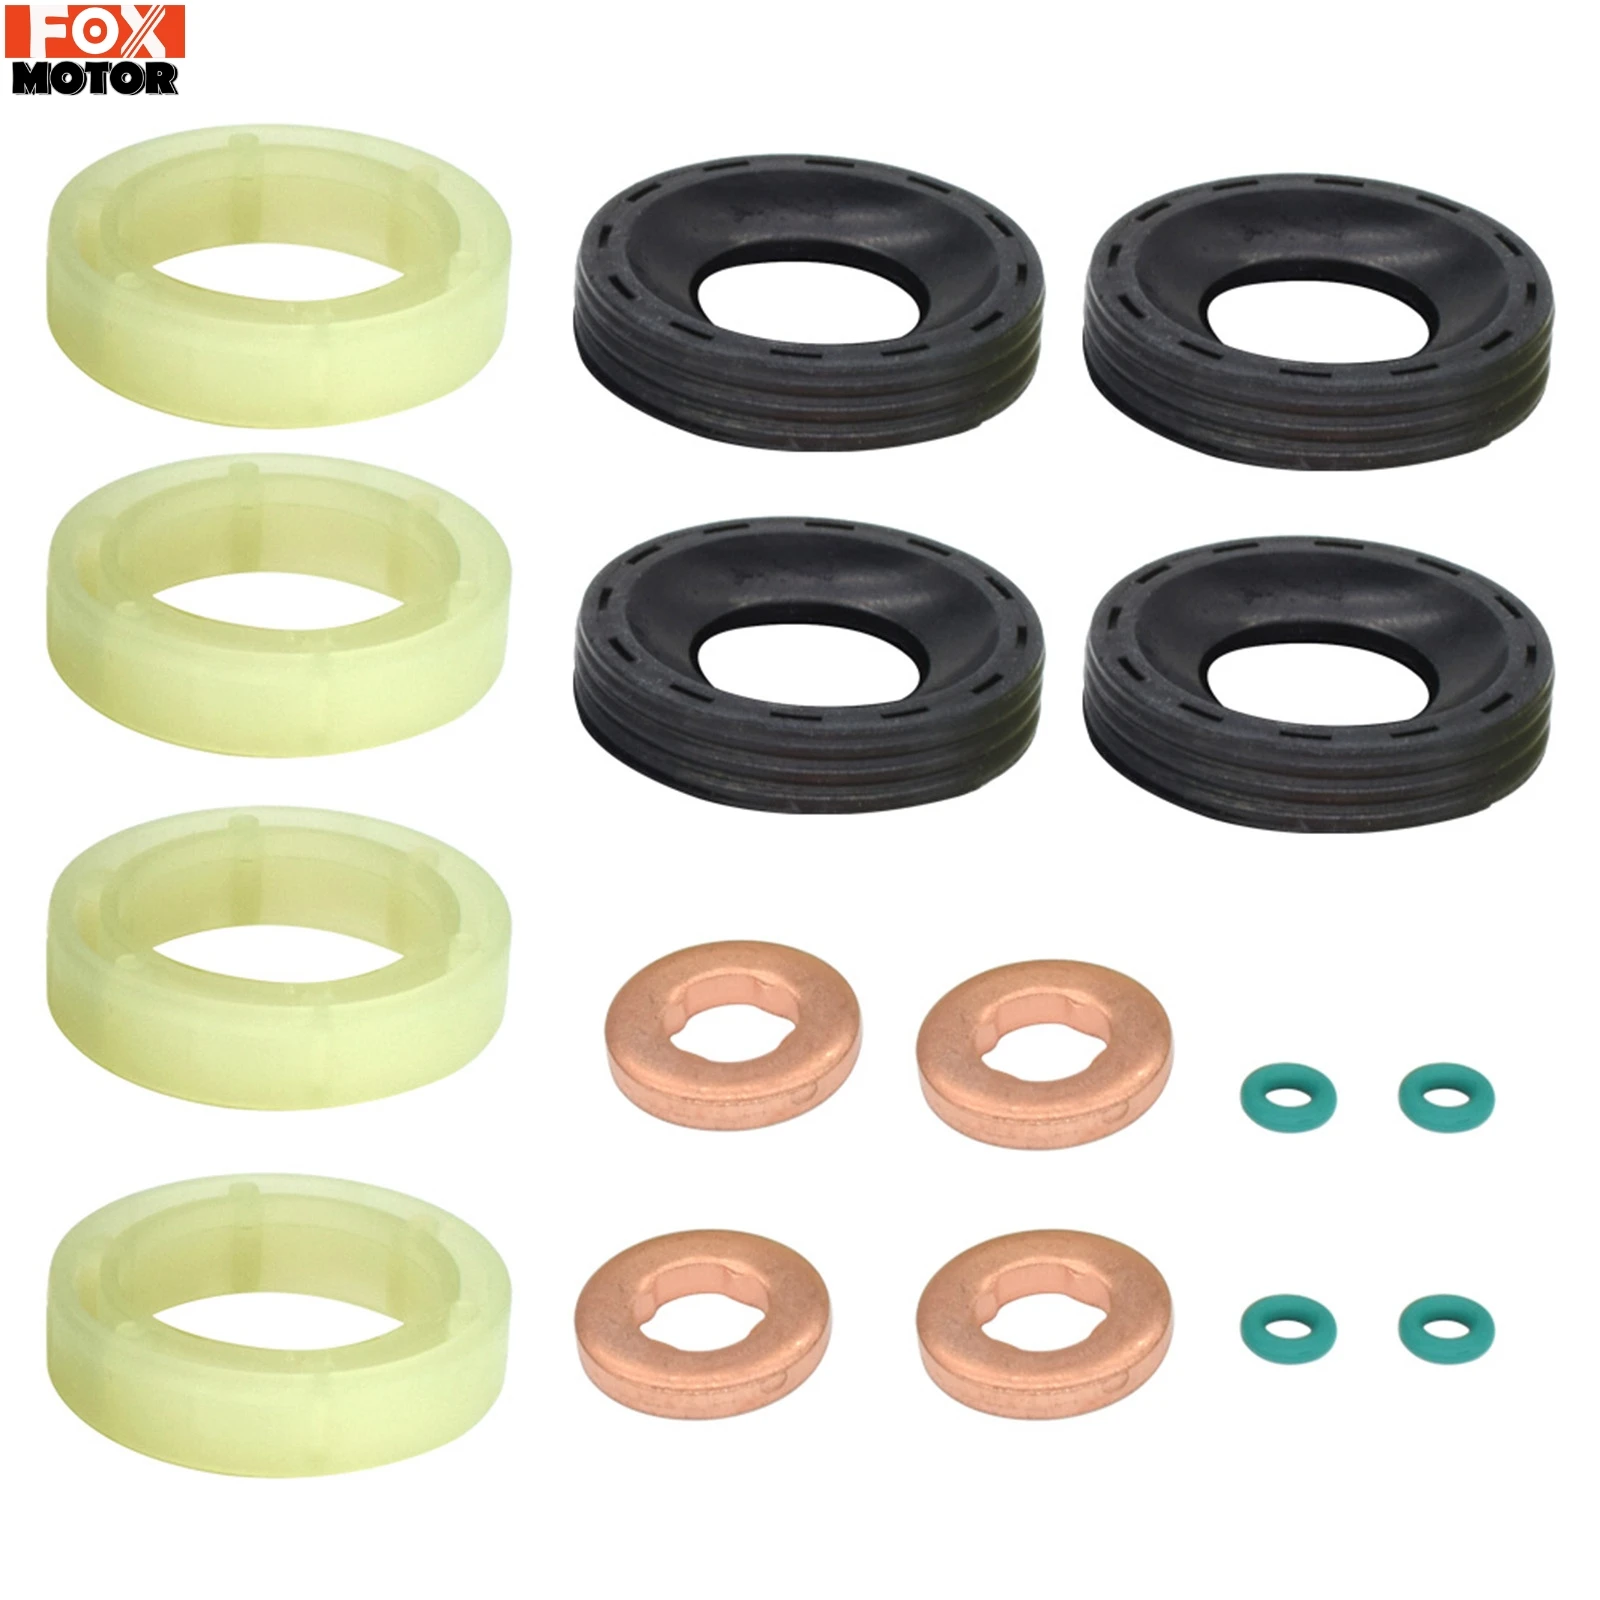 Car Diesel Engine Injector Sealing Ring Kit Fit for C-MAX Fiesta Focus 1.6HDI 198185 1982A0 198299 1432205 1314368 1233683 Diesel Injector Seals Washer Kit 